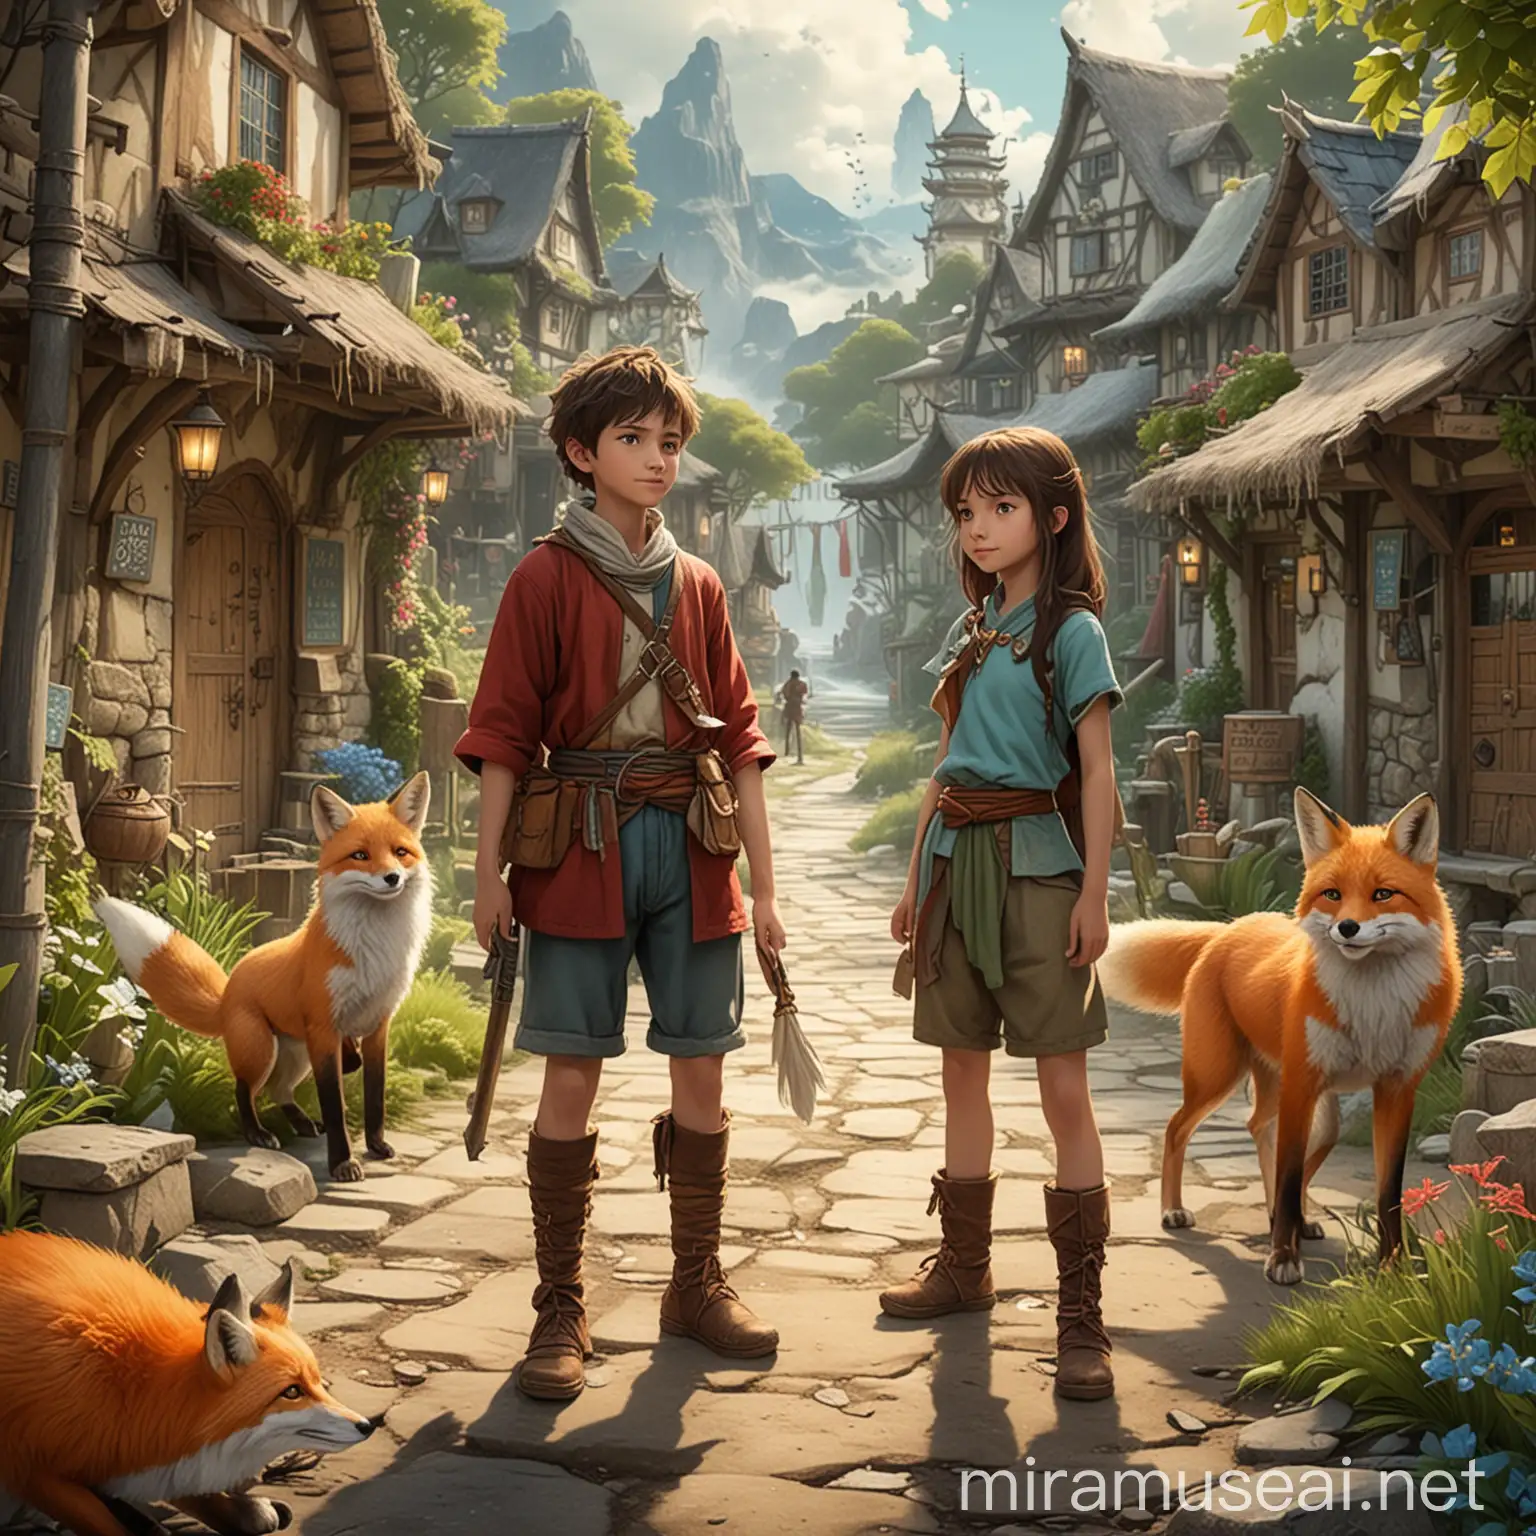 Imaginary Village Encounter Girl Fox and Boy in Search of Crystal Sea